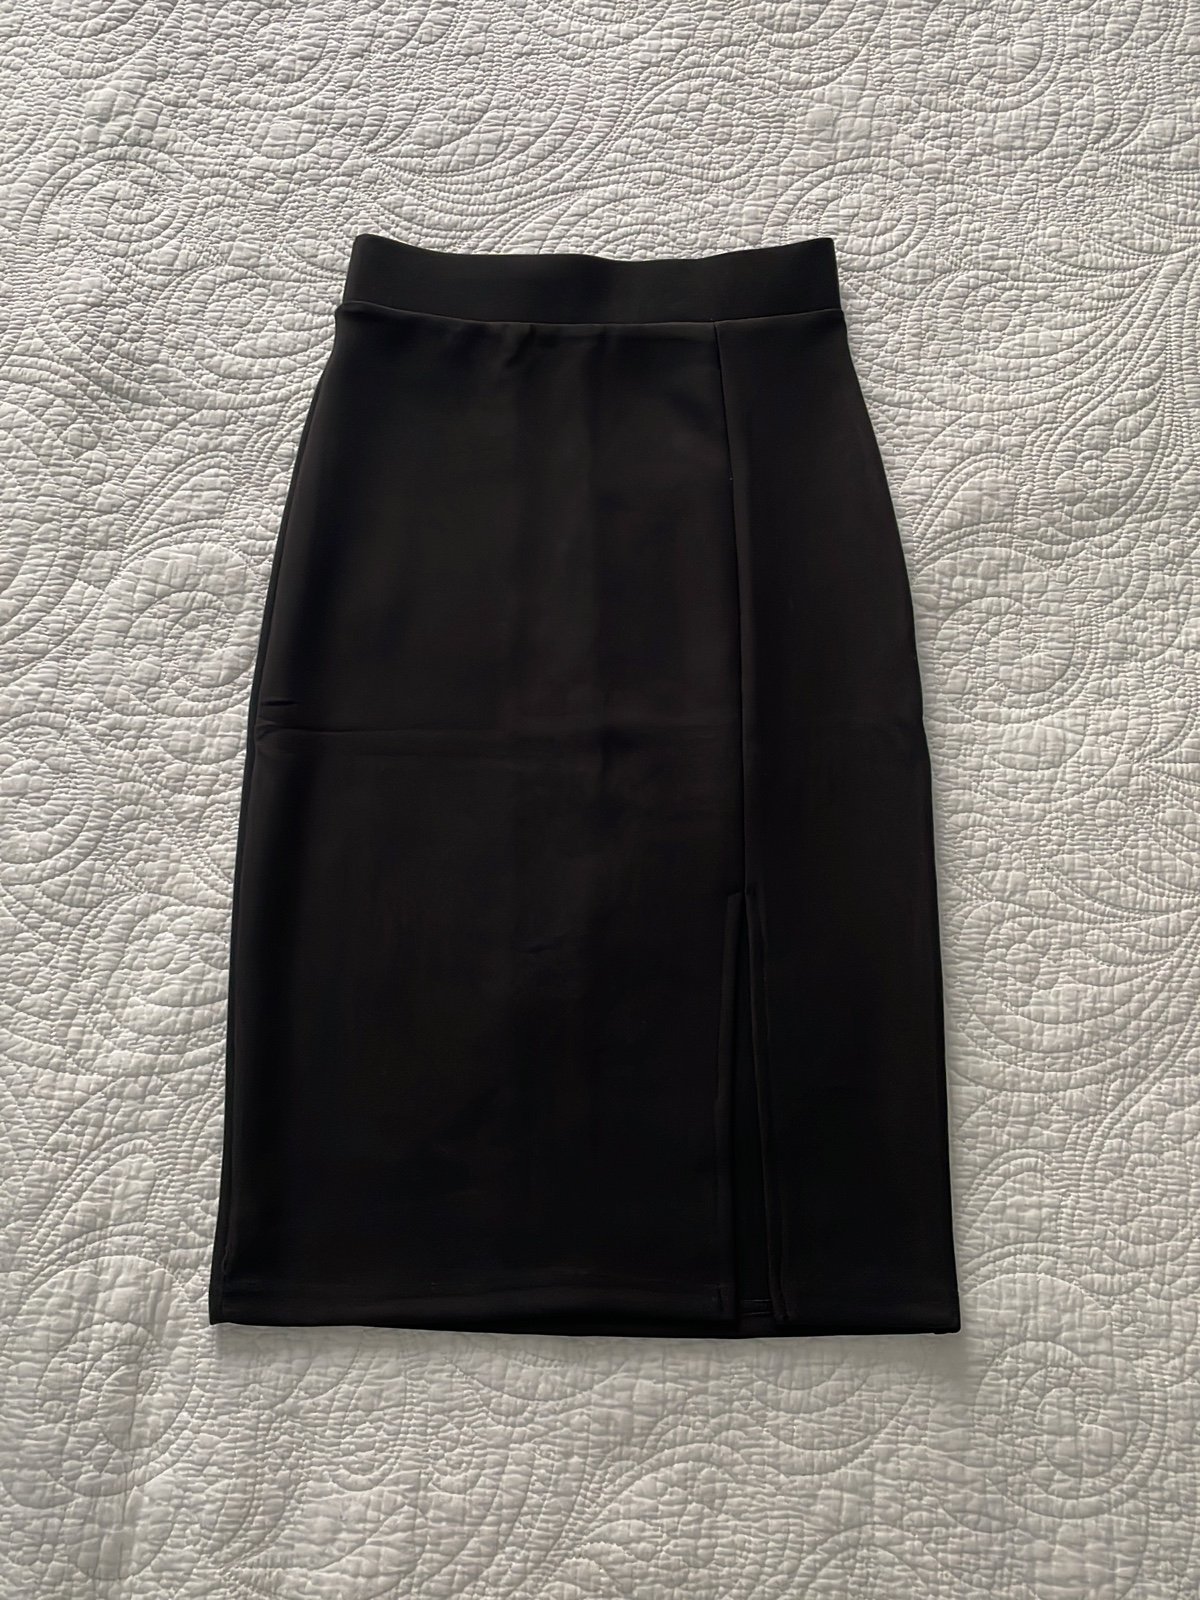 where to buy  Black Pencil Skirt with slit on the side 